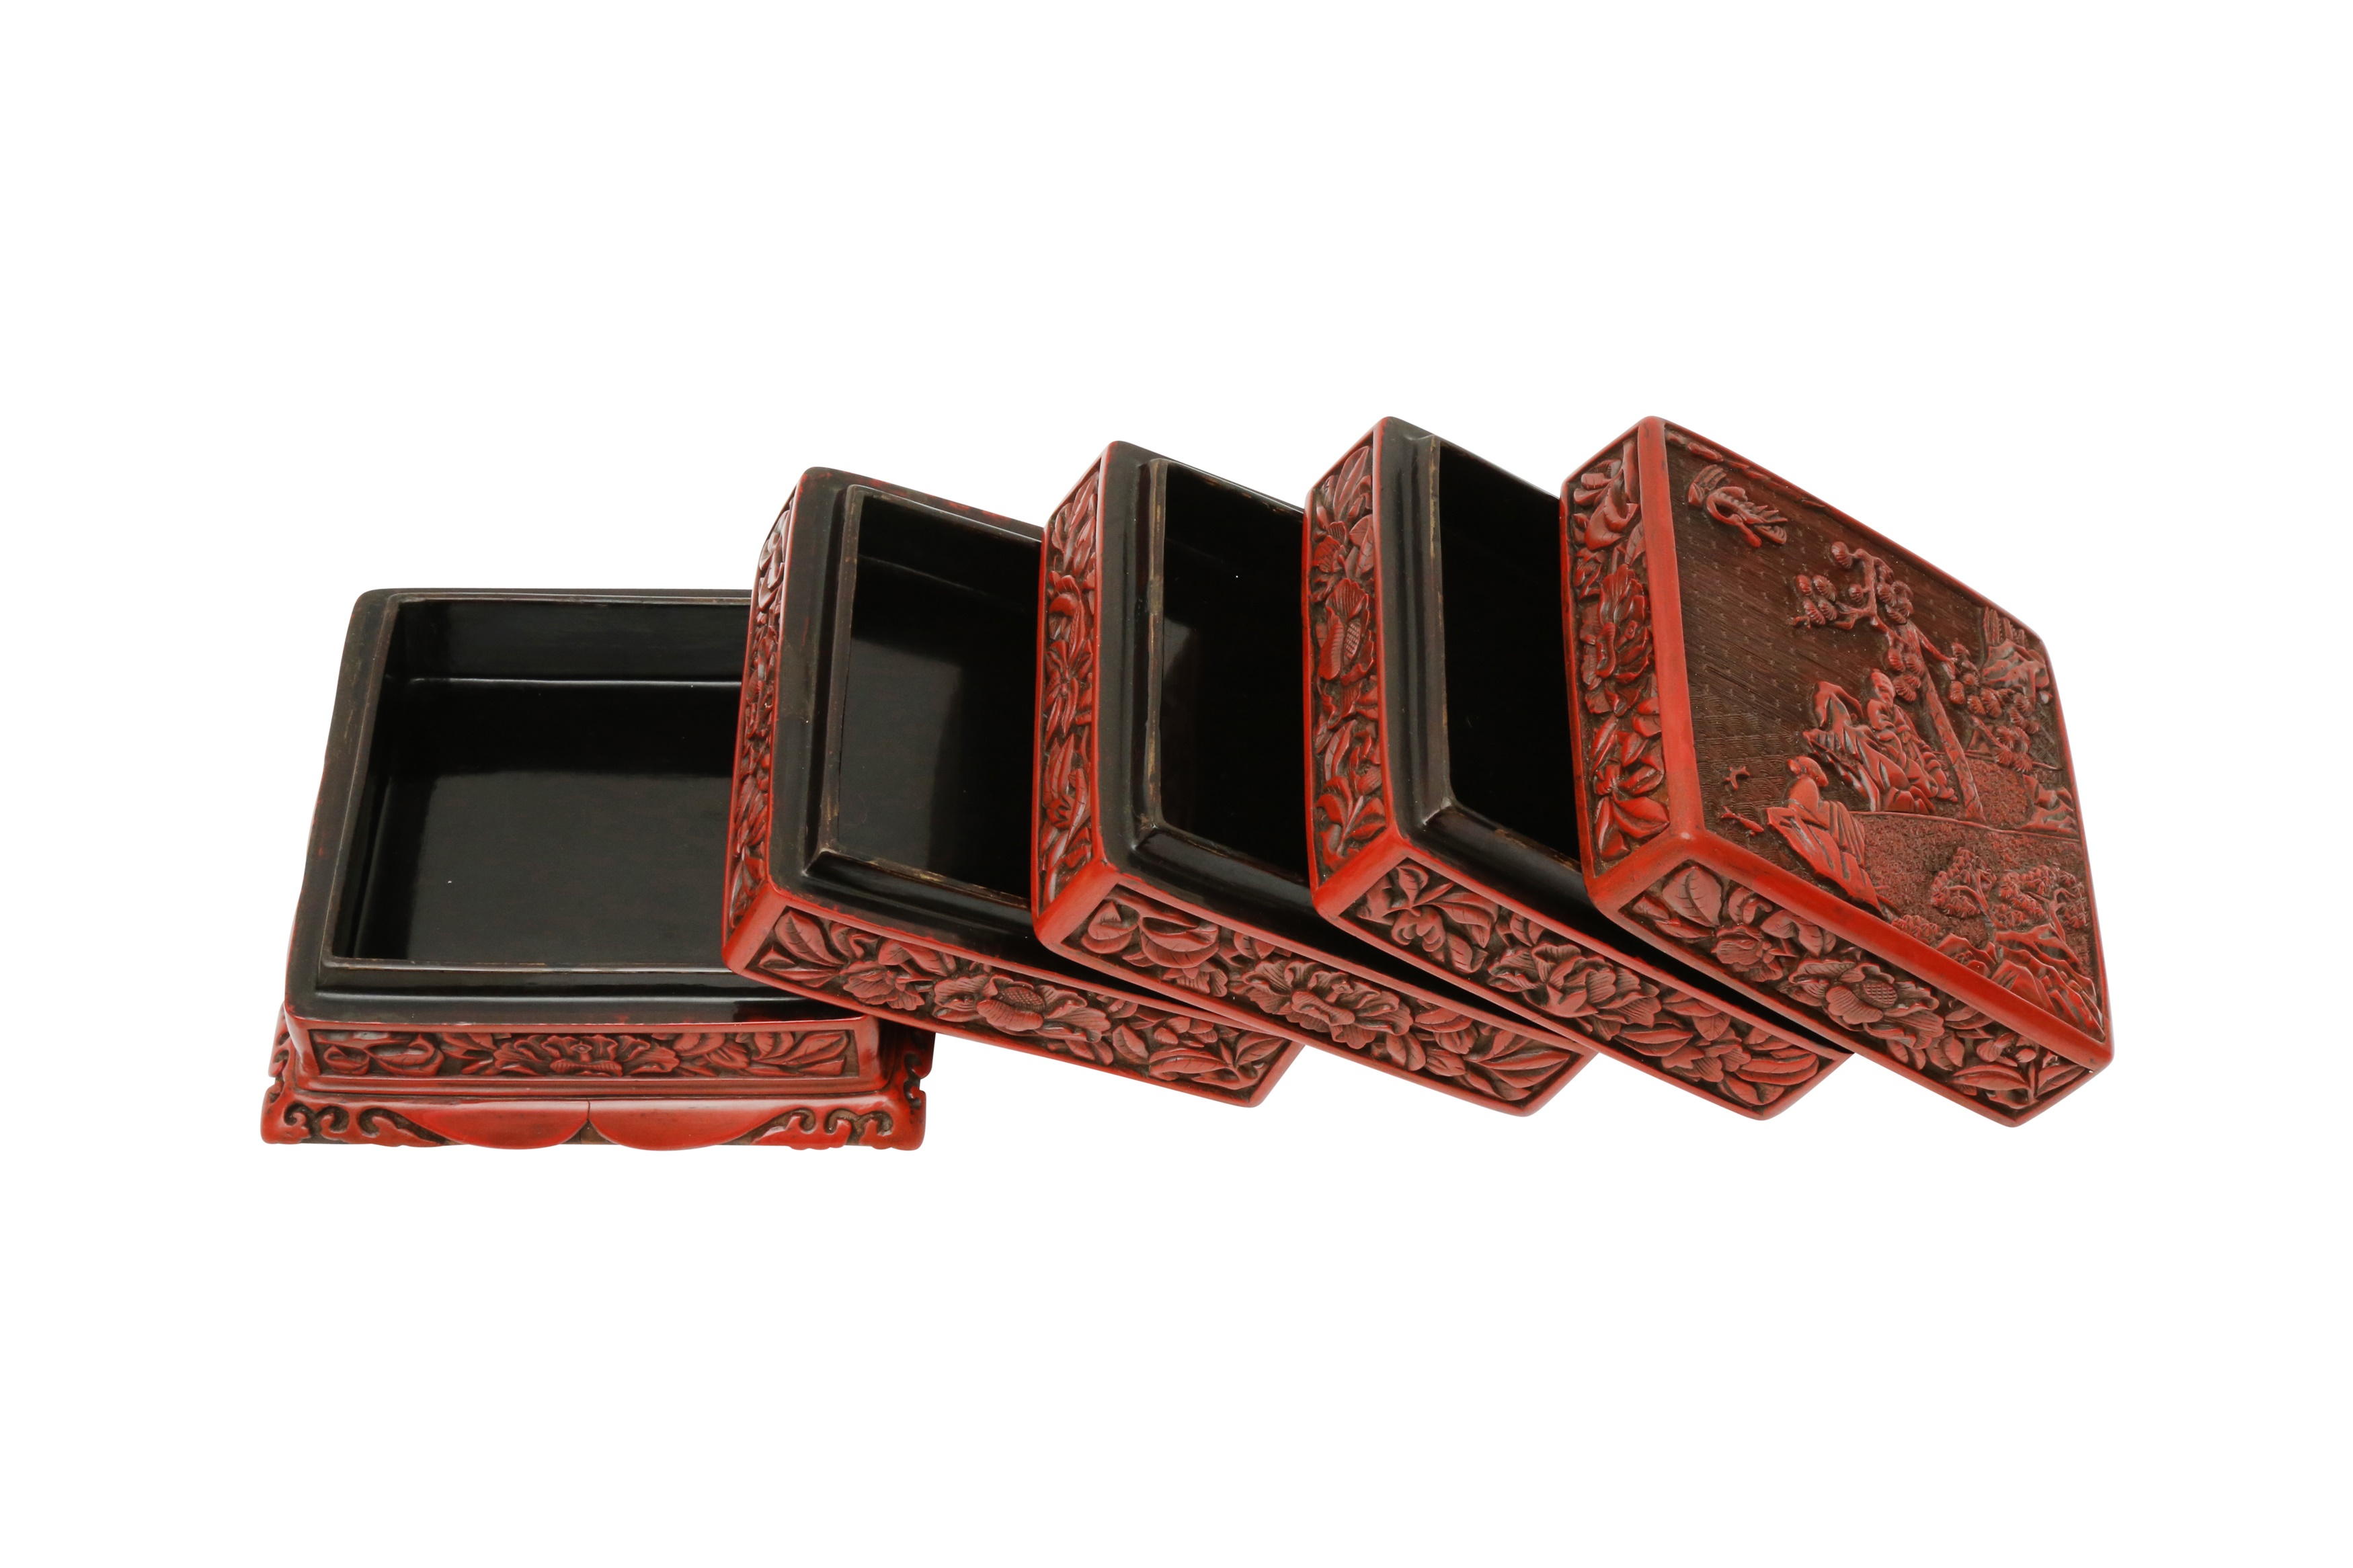 A CHINESE CINNABAR LACQUER TIERED BOX AND COVER 明 剔紅士大夫圖紋四層蓋盒 - Image 3 of 38